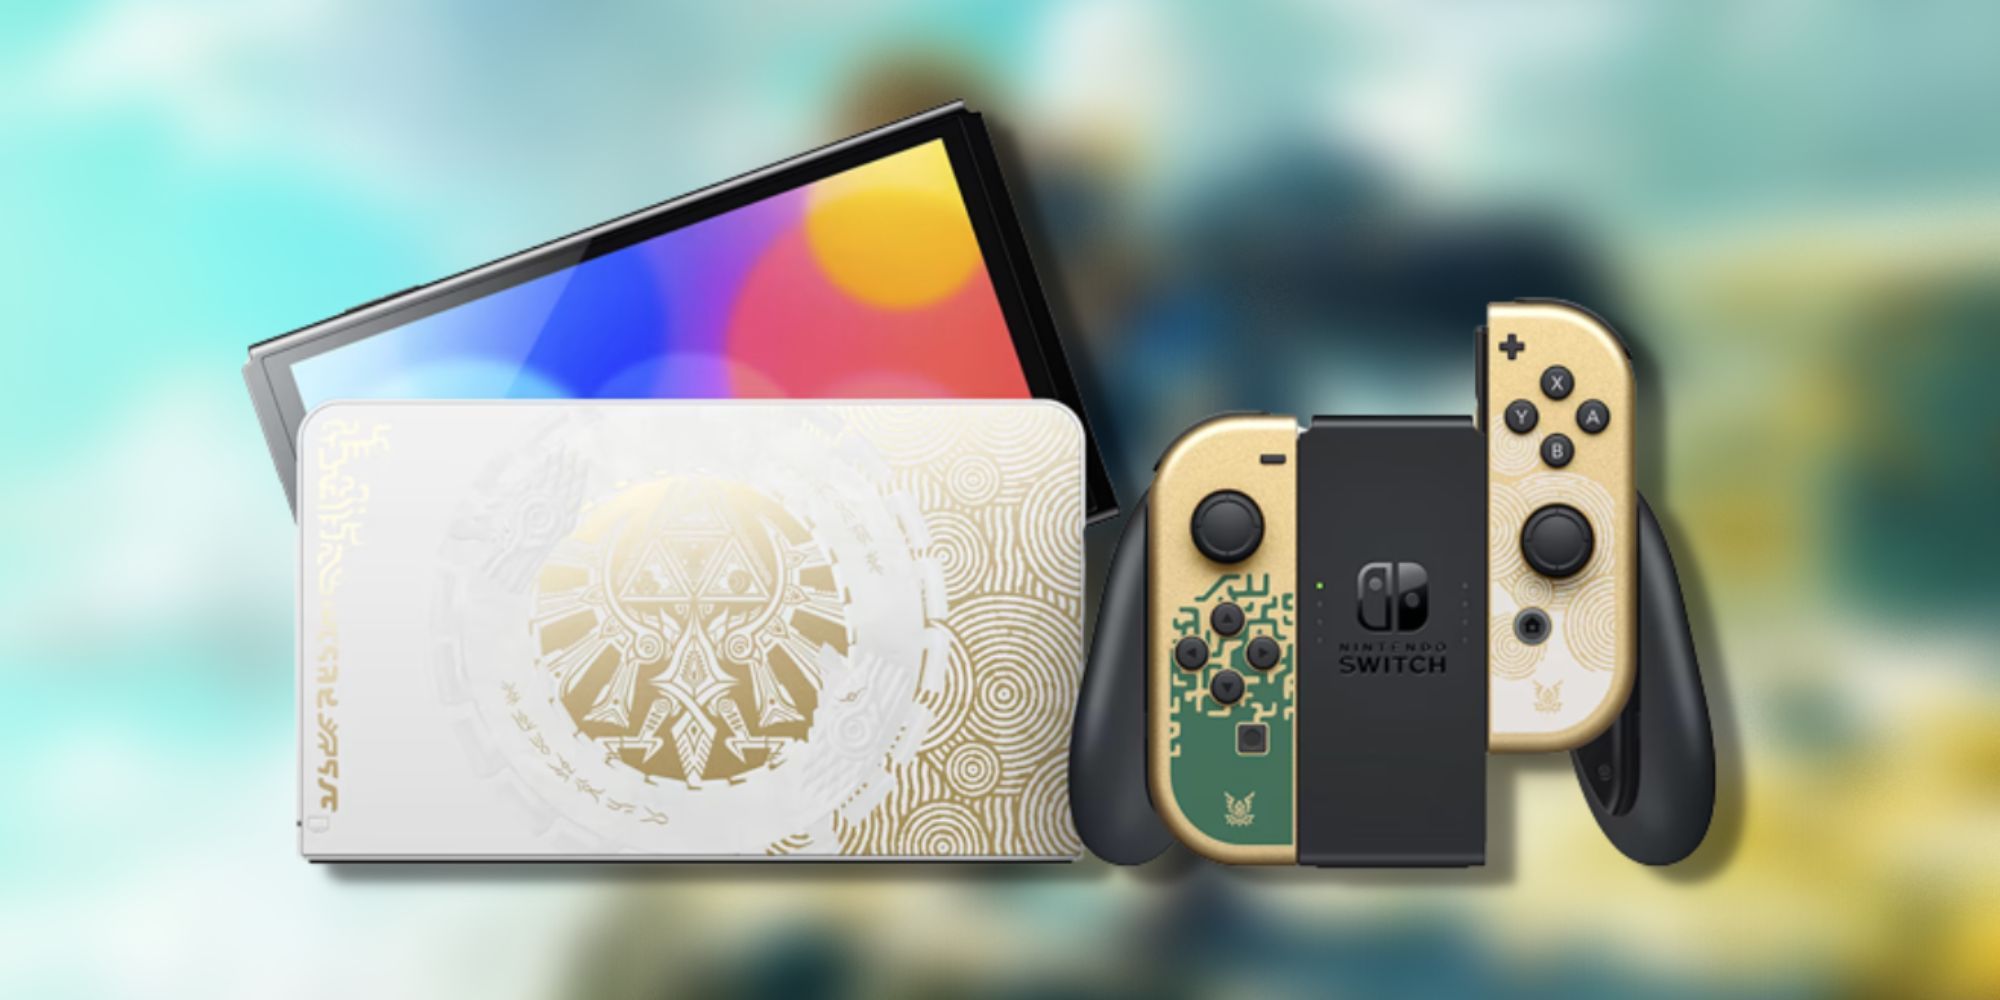 Where to Preorder the Legend of Zelda Nintendo Switch OLED Model